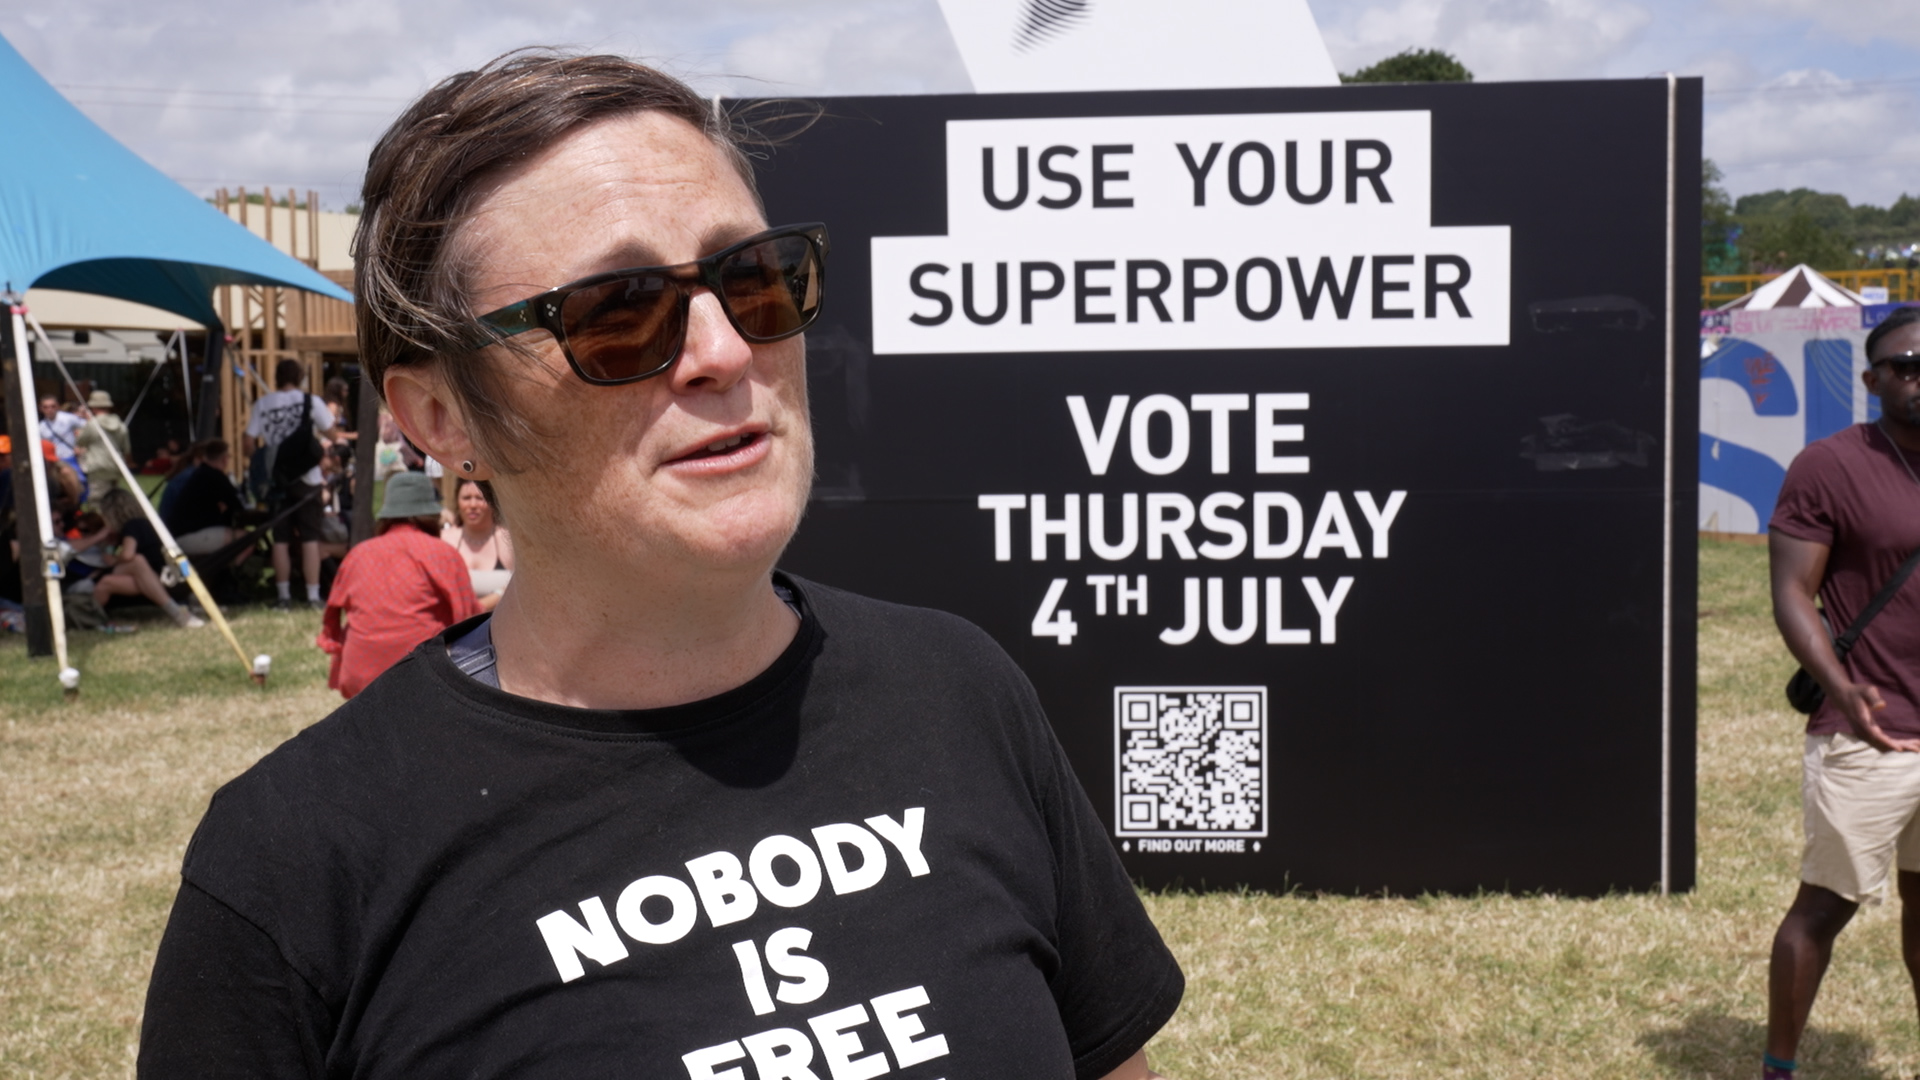 Festival-goer Anne Langford speaks in front of a black giant ballot box at Glastonbury which features the message 'Use Your Superpower. Vote Thursday 4th July'